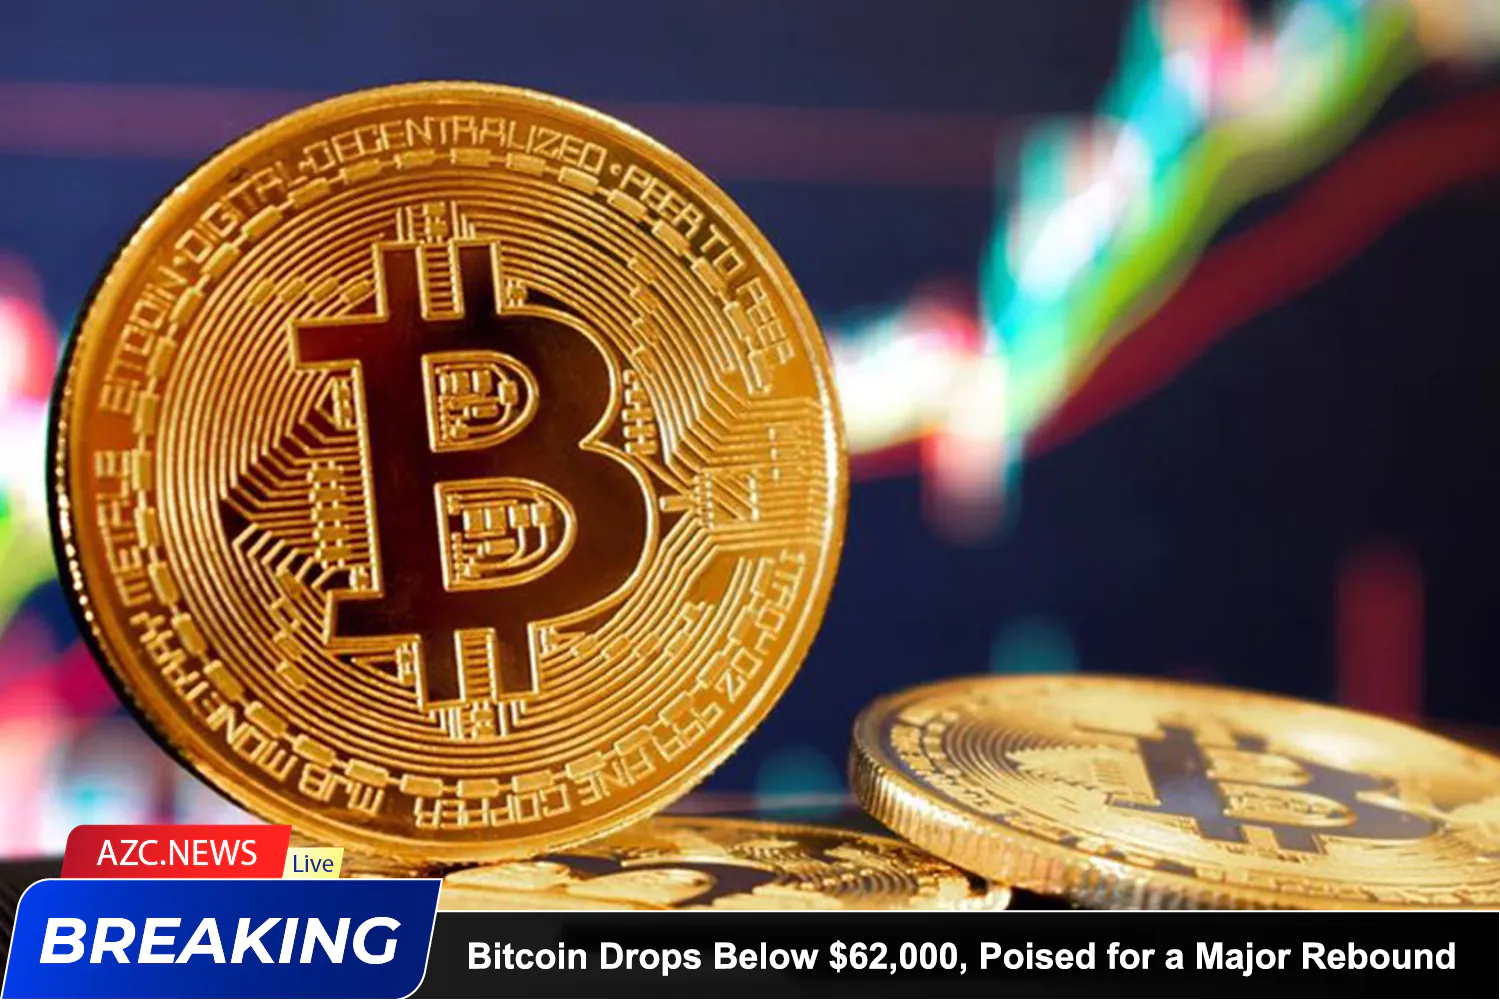 Azcnews Bitcoin Drops Below $62,000, Poised For A Major Rebound